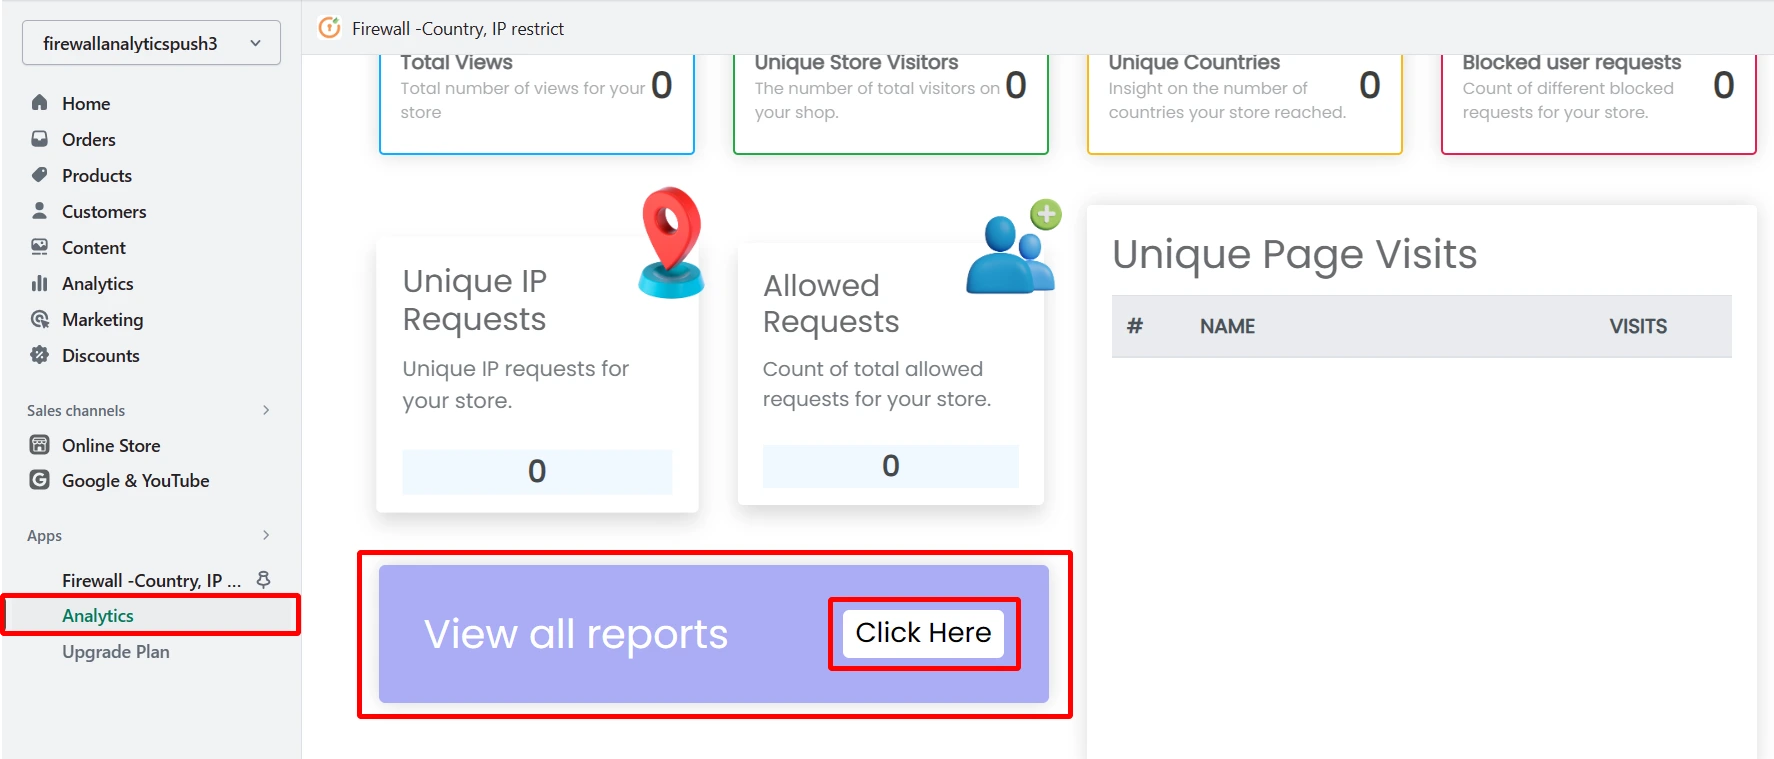 analytics report section - shopify firewall ip restrict application